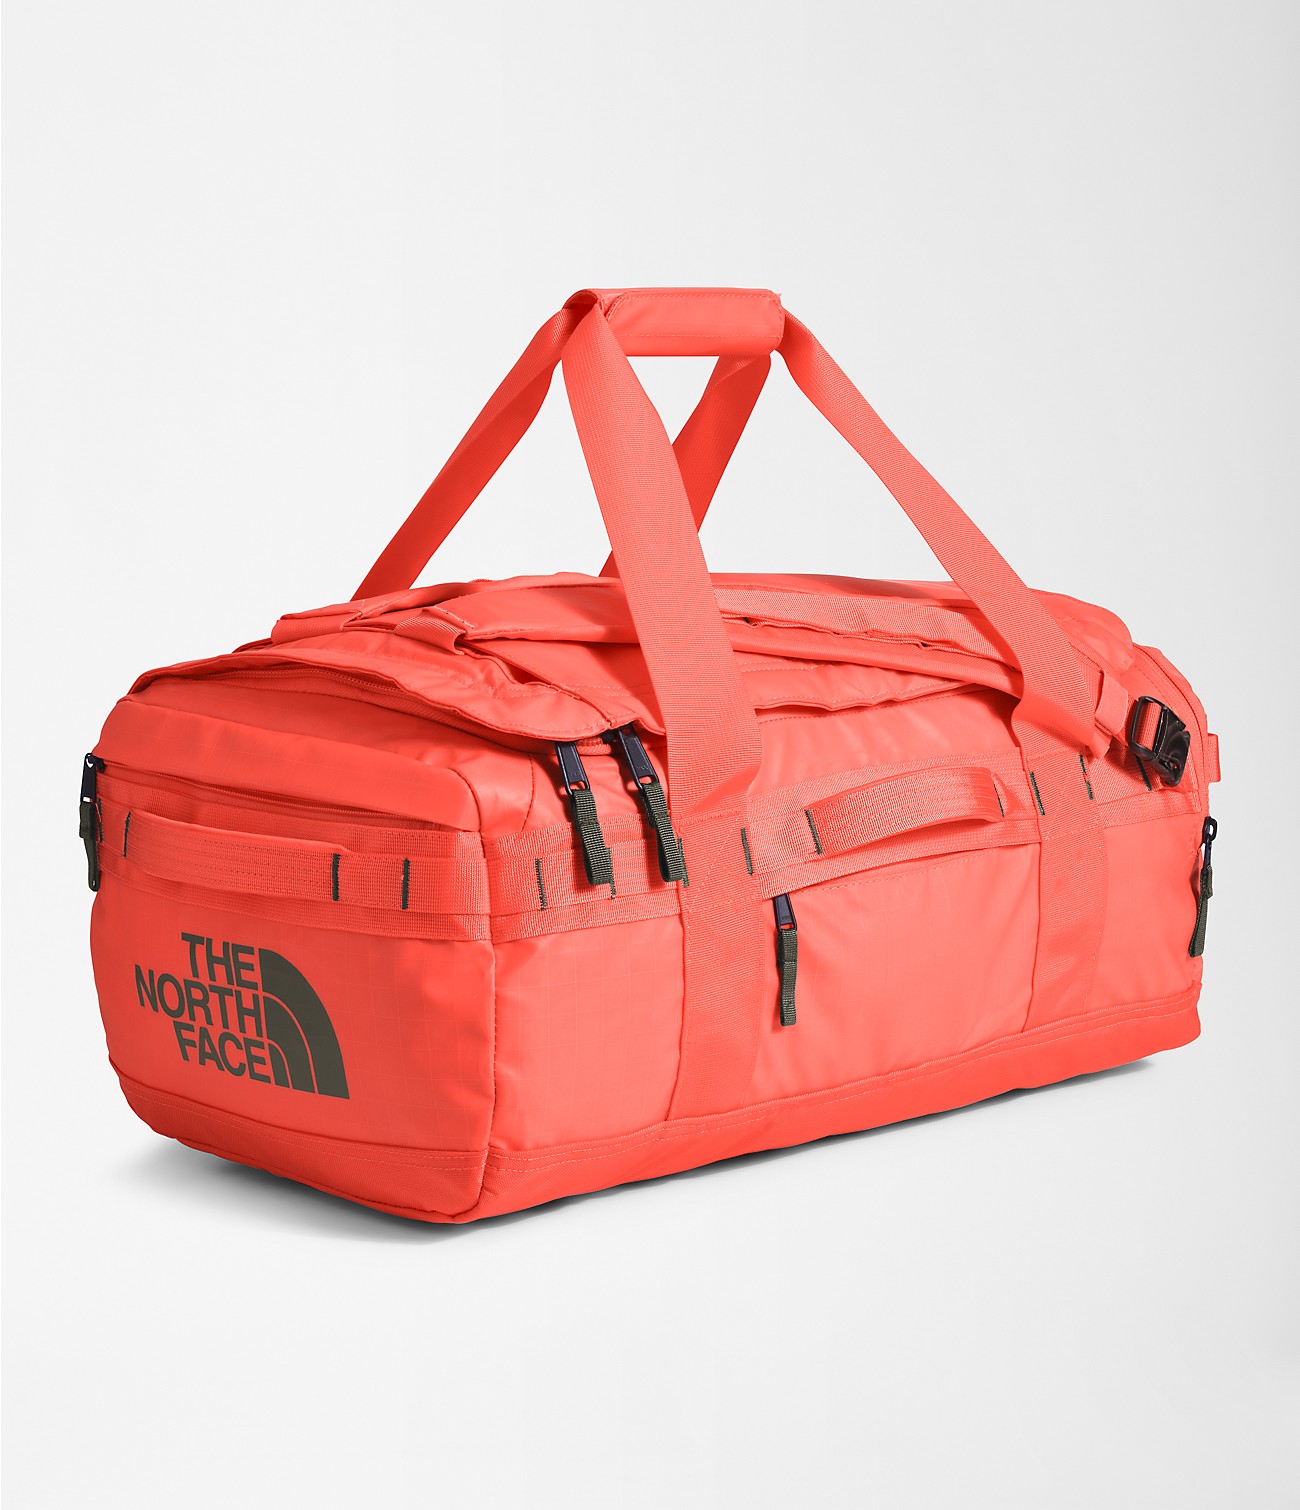 Unlock Wilderness' choice in the Osprey Vs North Face comparison, the Base Camp Voyager Duffel—42L by The North Face